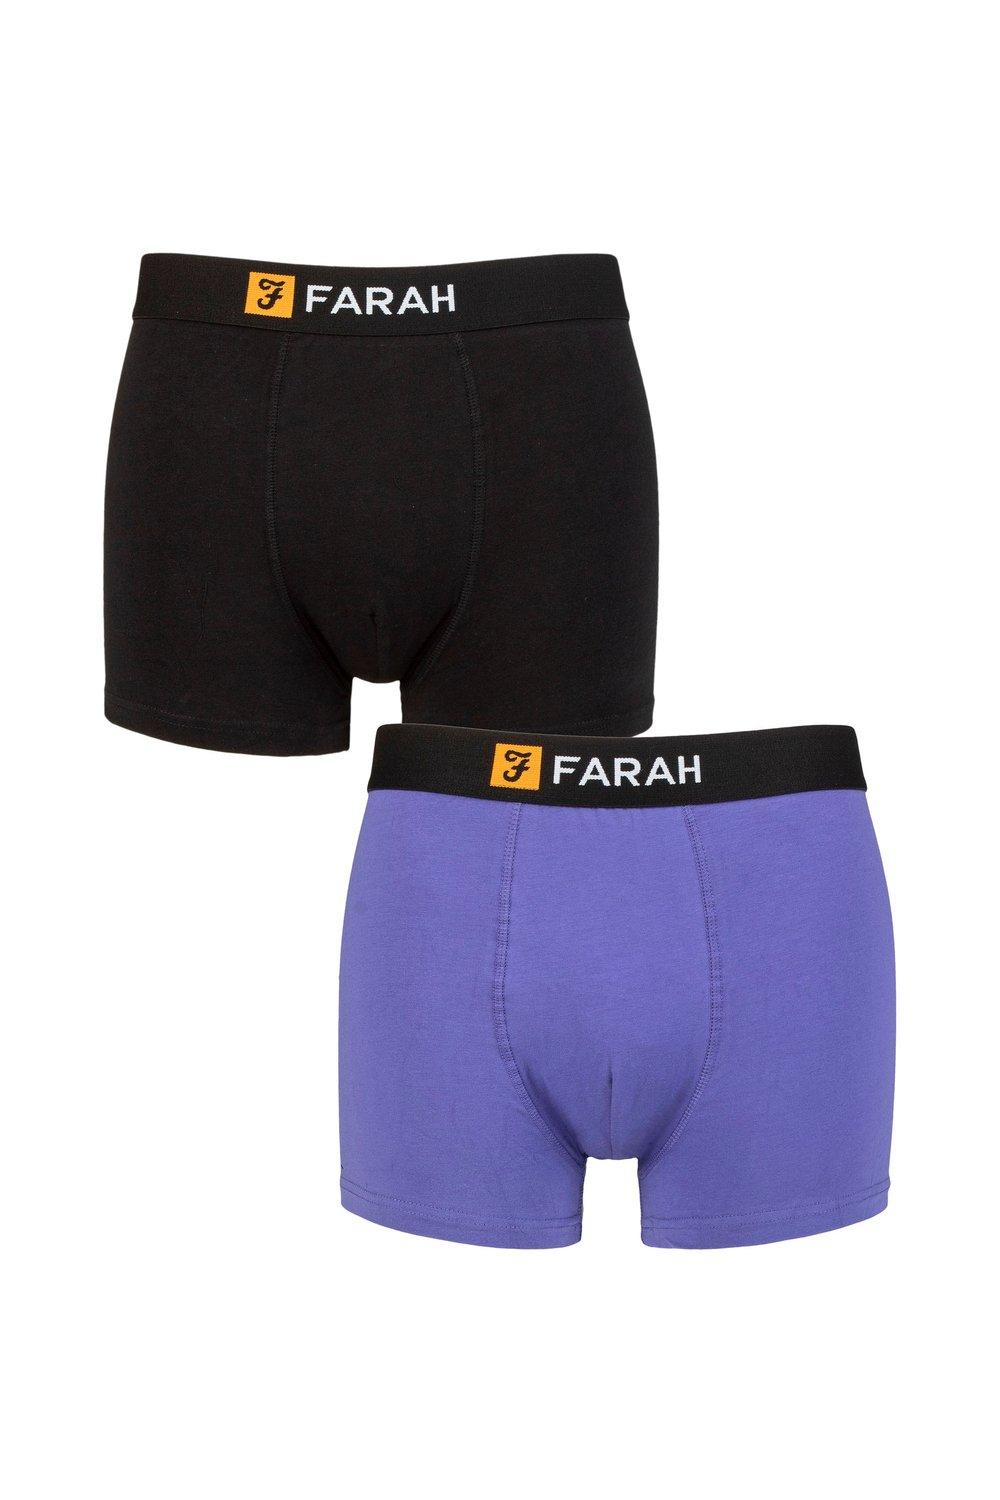 Mens 2 Pack Farah Plain Cotton Classic Fitted Trunks